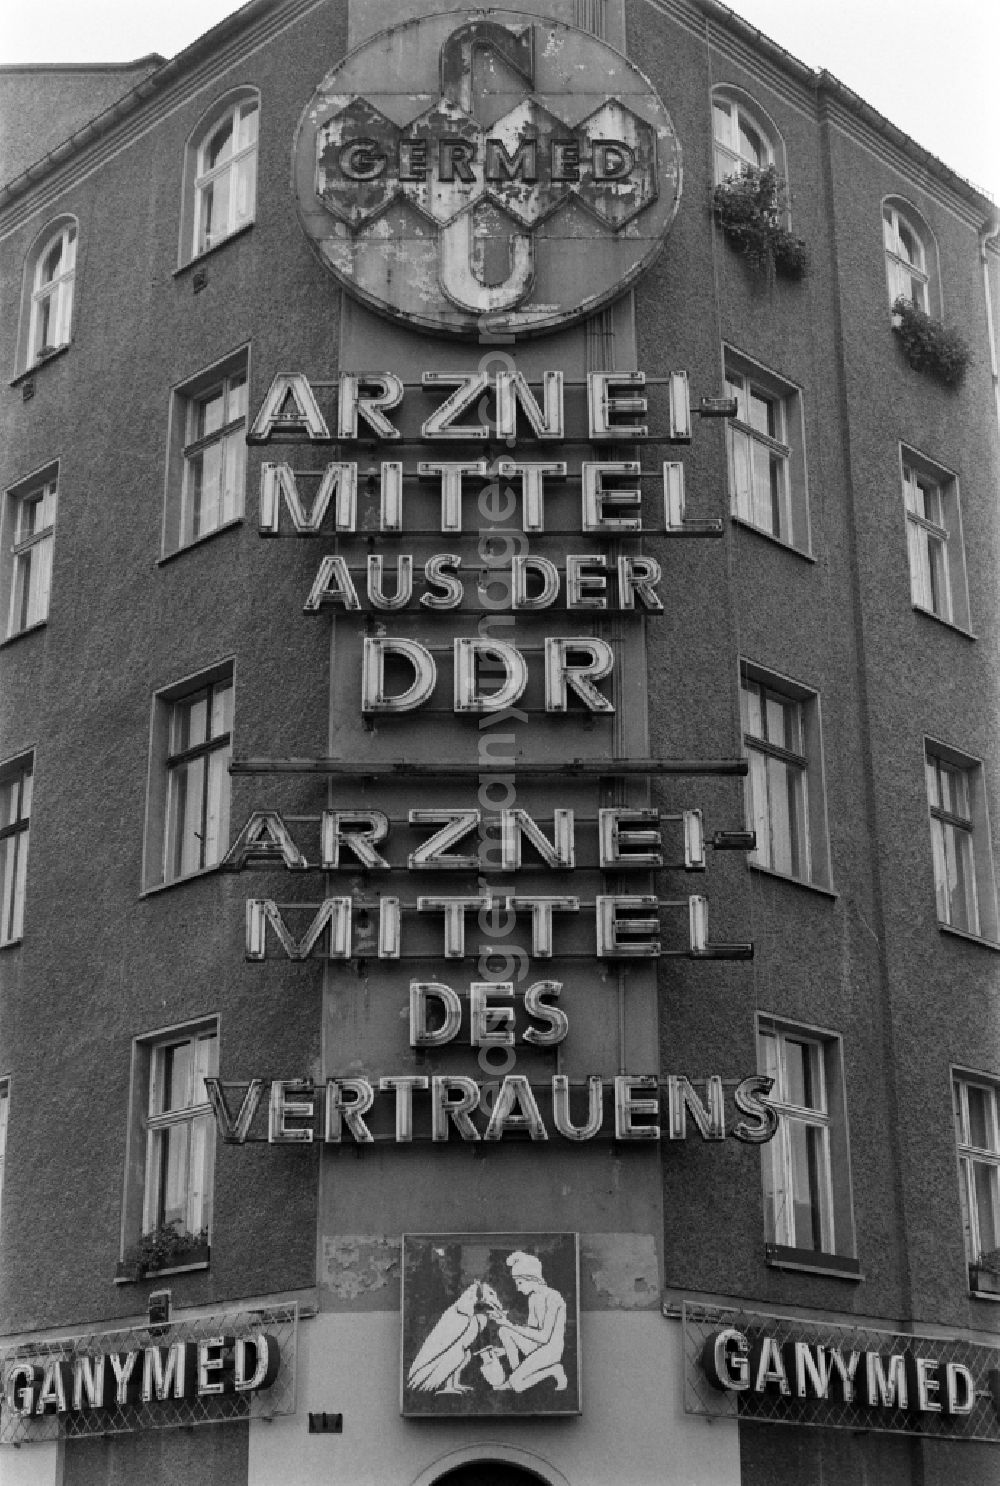 GDR photo archive: Berlin - Advertisement for GERMED - drugs from the GDR is located above the closed wine restaurant Ganymed at Schiffbauerdamm in Berlin - Mitte, the former capital of the GDR, German Democratic Republic